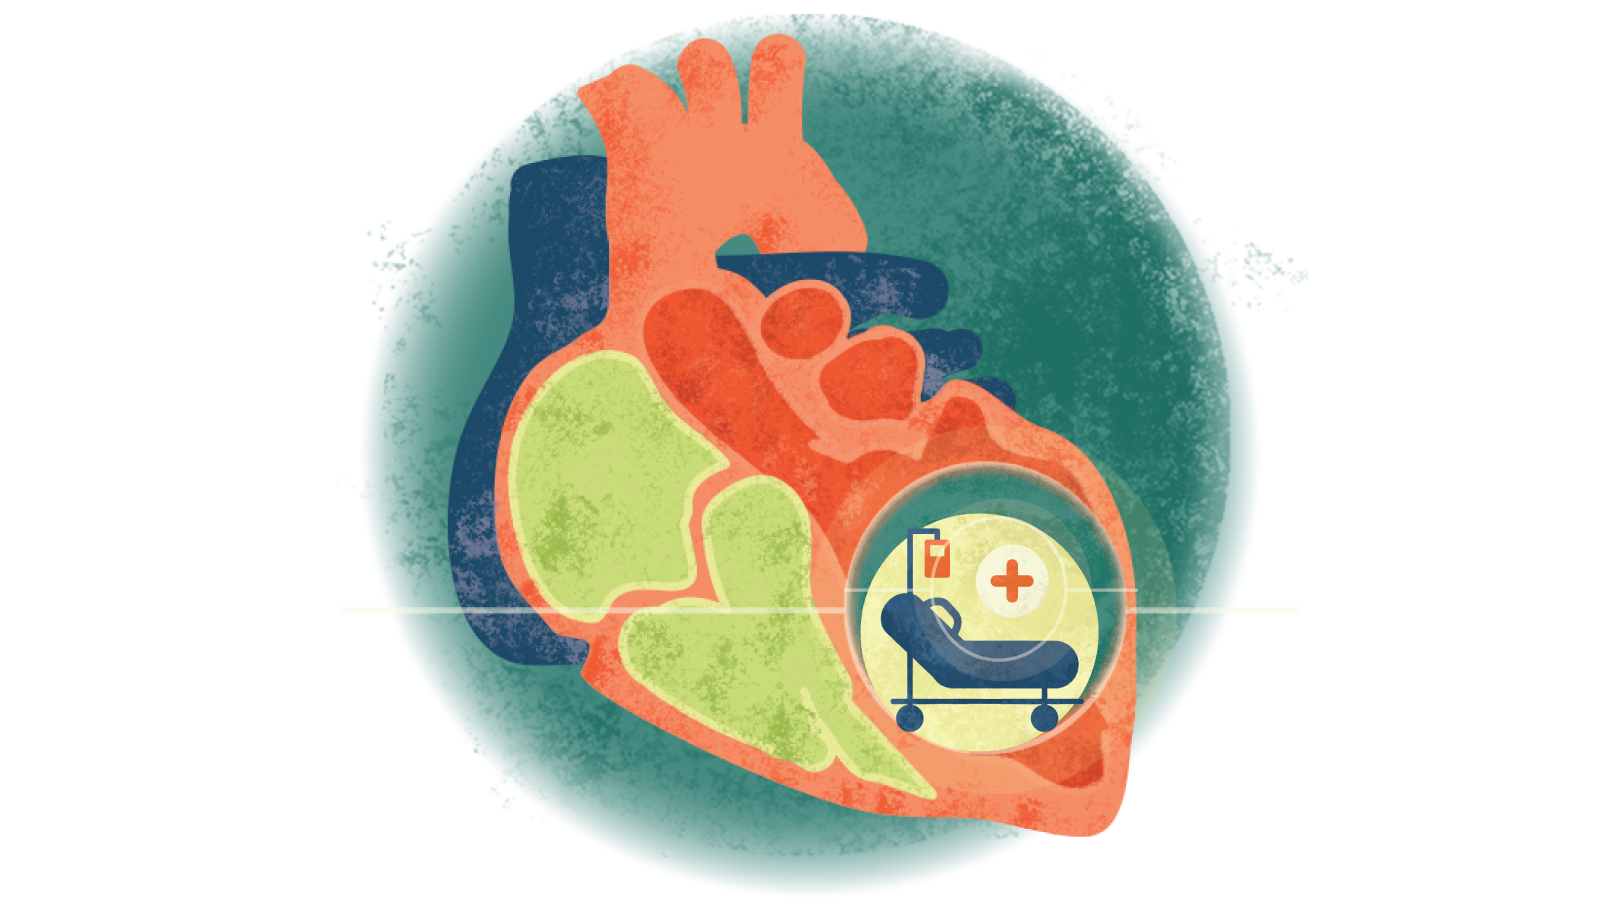 Illustration of a hospital bed, IV, and a red medical plus icon in a circle over a heart with cardiomyopathy